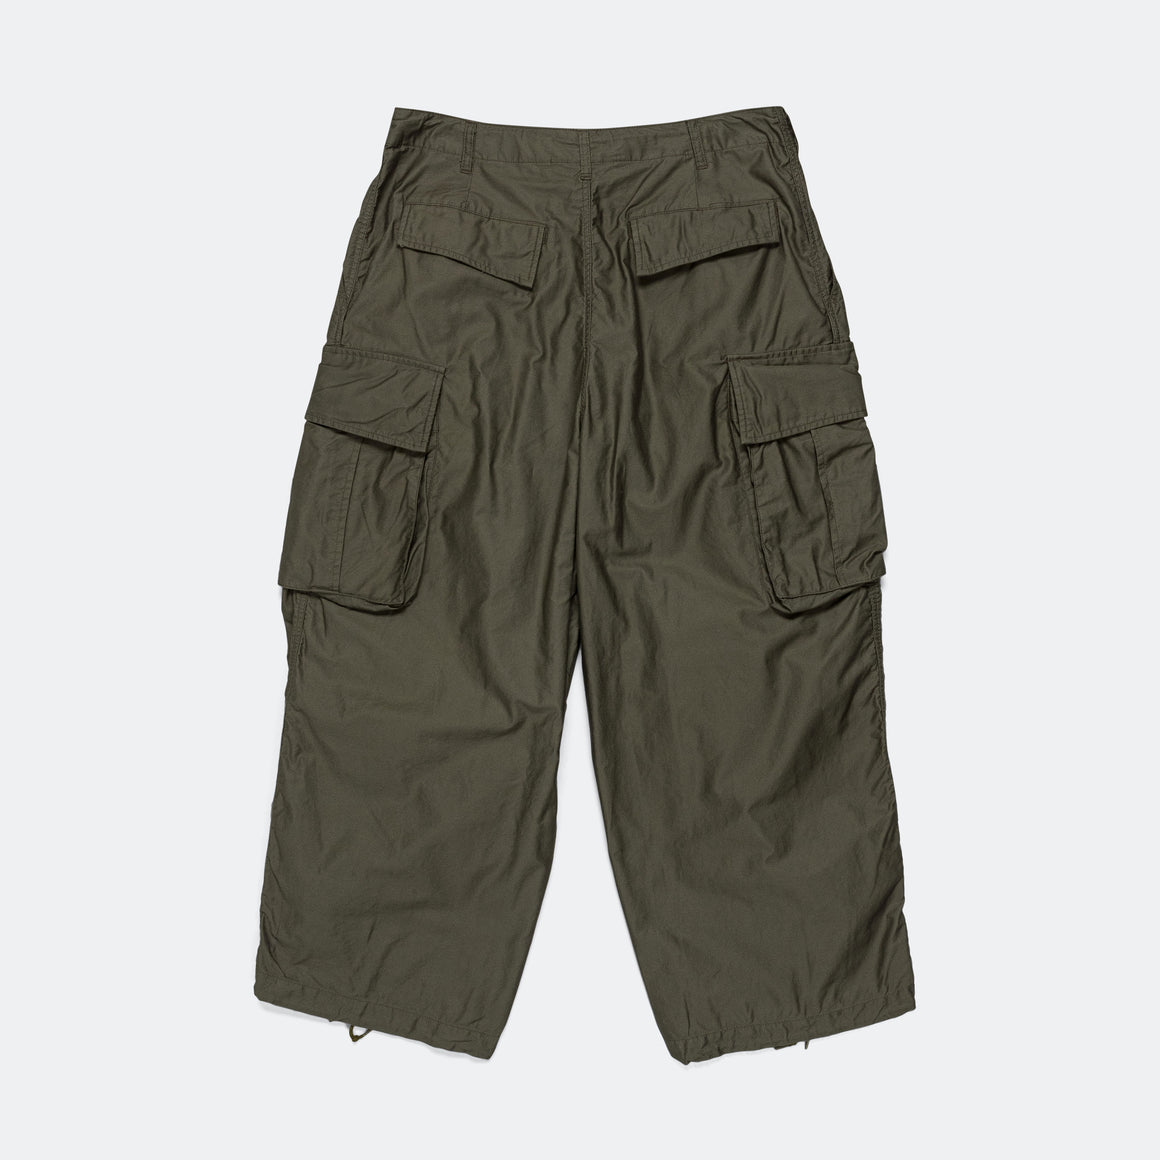 Needles - H.D. Pant -  Olive BDU - UP THERE